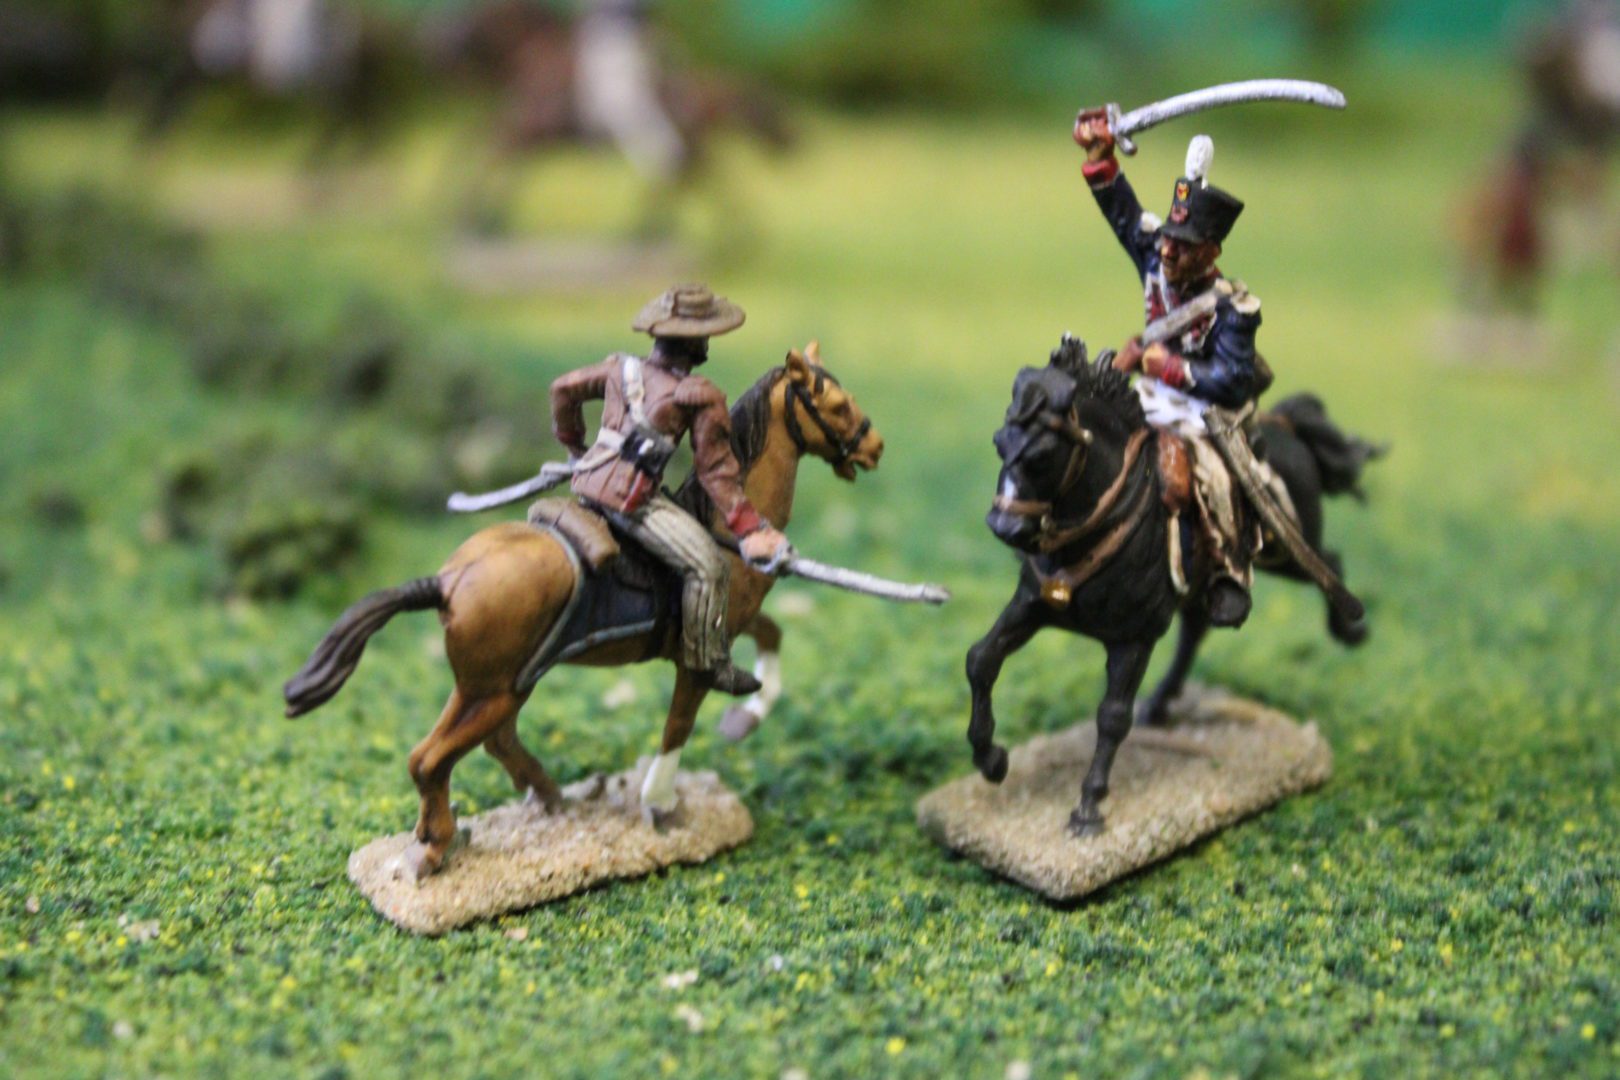 Historian Richard Crawford's miniature version of the Battle of Medina will be on display Wednesday, May 18 at 6:00 p.m. at the Southside High School new gymnasium. 